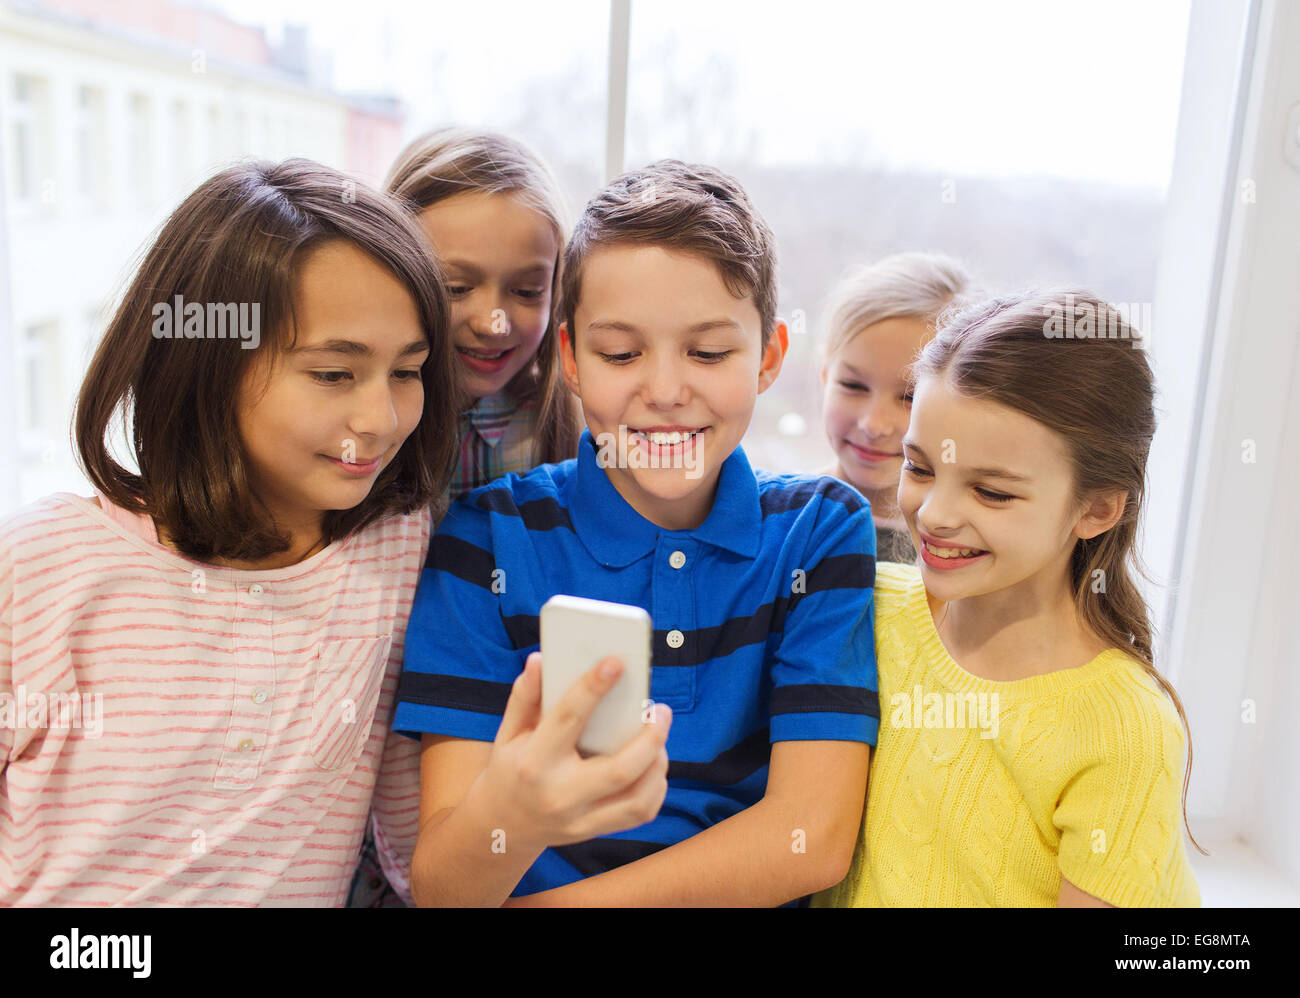 group of school kids taking selfie with smartphone Stock Photo